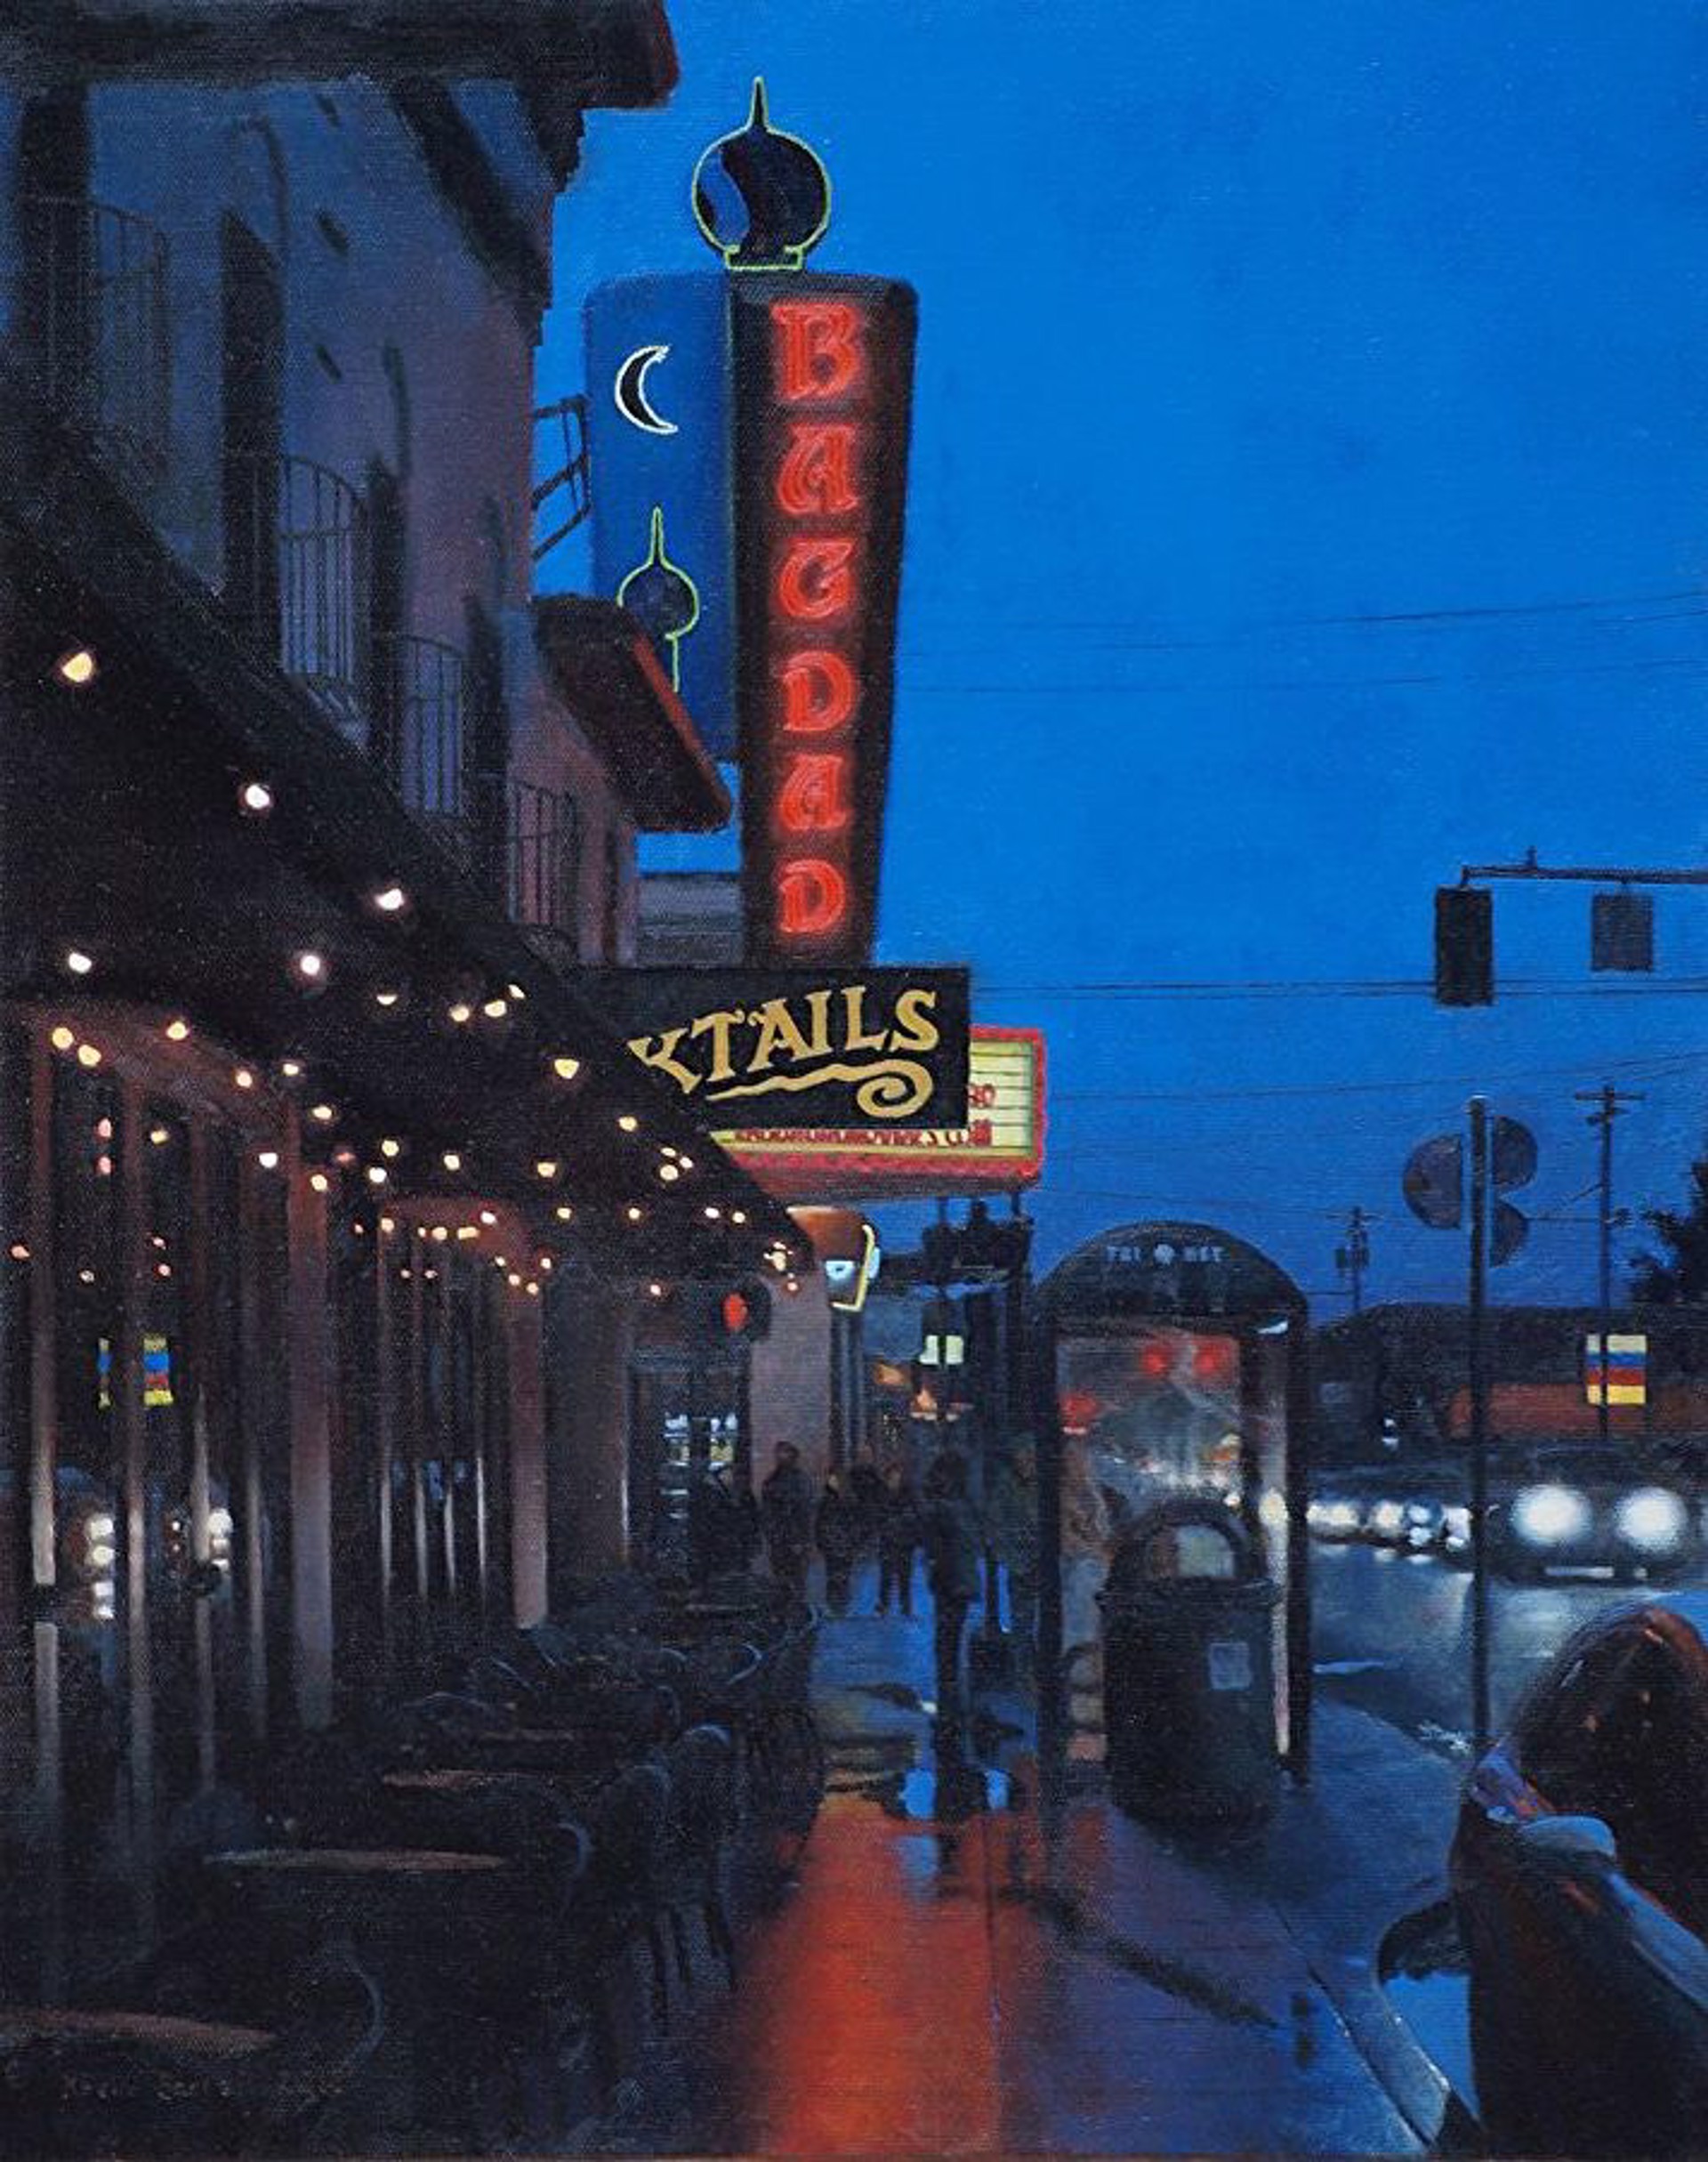 Caf� on a Rainy Night by Kevin Farrell